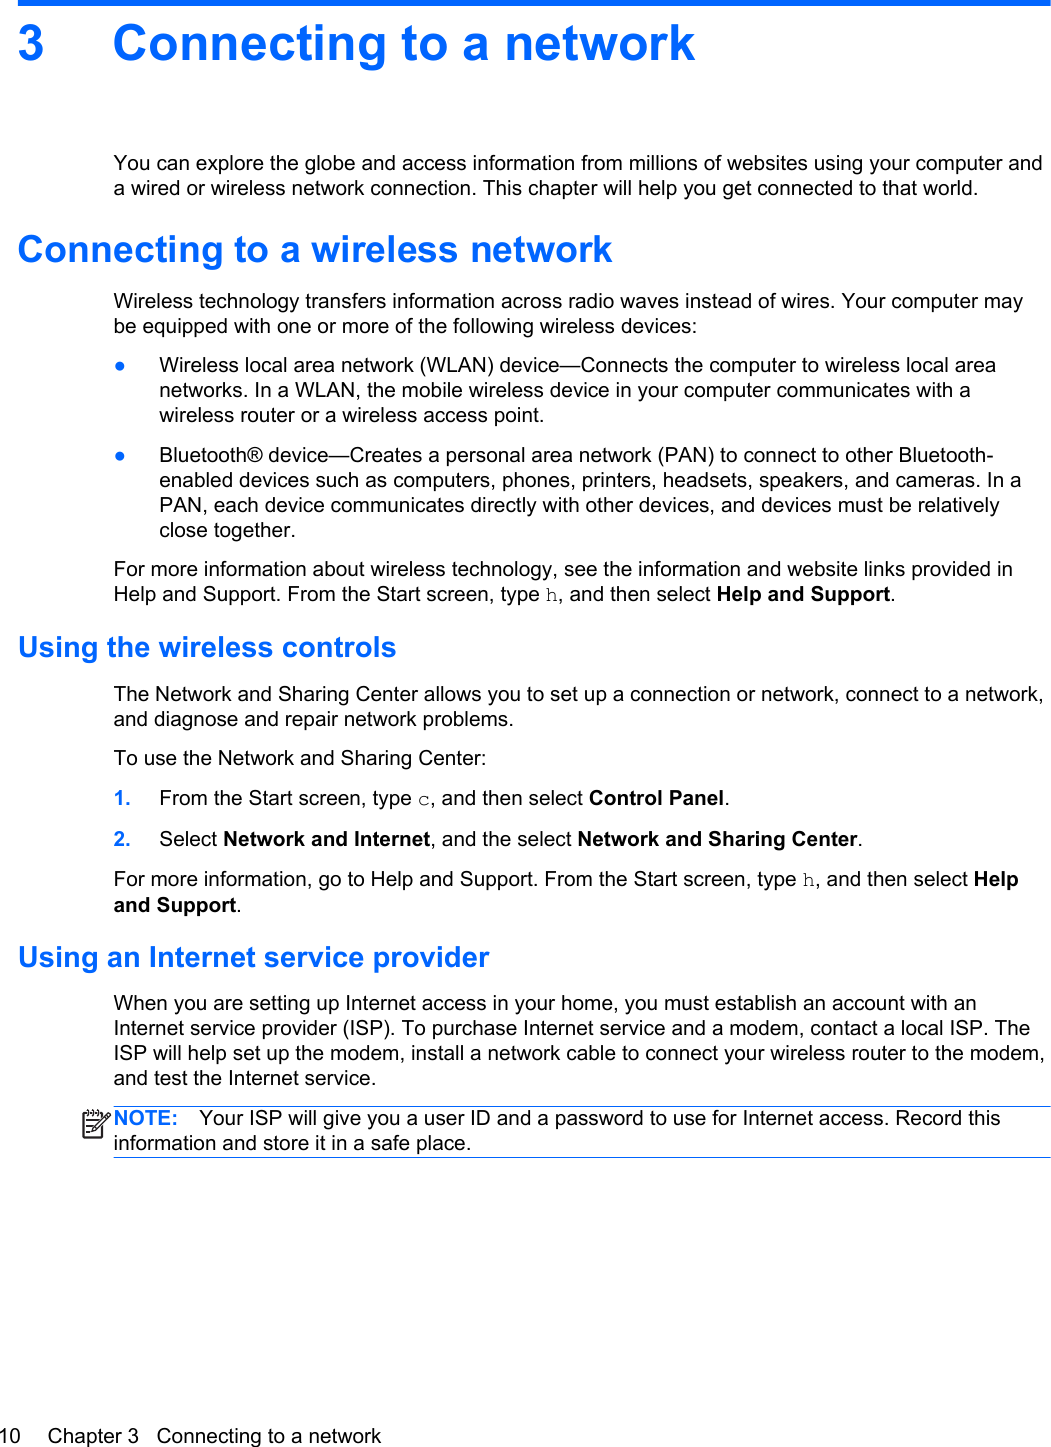 3 Connecting to a networkYou can explore the globe and access information from millions of websites using your computer anda wired or wireless network connection. This chapter will help you get connected to that world.Connecting to a wireless networkWireless technology transfers information across radio waves instead of wires. Your computer maybe equipped with one or more of the following wireless devices:●Wireless local area network (WLAN) device—Connects the computer to wireless local areanetworks. In a WLAN, the mobile wireless device in your computer communicates with awireless router or a wireless access point.●Bluetooth® device—Creates a personal area network (PAN) to connect to other Bluetooth-enabled devices such as computers, phones, printers, headsets, speakers, and cameras. In aPAN, each device communicates directly with other devices, and devices must be relativelyclose together.For more information about wireless technology, see the information and website links provided inHelp and Support. From the Start screen, type h, and then select Help and Support.Using the wireless controlsThe Network and Sharing Center allows you to set up a connection or network, connect to a network,and diagnose and repair network problems.To use the Network and Sharing Center:1. From the Start screen, type c, and then select Control Panel.2. Select Network and Internet, and the select Network and Sharing Center.For more information, go to Help and Support. From the Start screen, type h, and then select Helpand Support.Using an Internet service providerWhen you are setting up Internet access in your home, you must establish an account with anInternet service provider (ISP). To purchase Internet service and a modem, contact a local ISP. TheISP will help set up the modem, install a network cable to connect your wireless router to the modem,and test the Internet service.NOTE: Your ISP will give you a user ID and a password to use for Internet access. Record thisinformation and store it in a safe place.10 Chapter 3   Connecting to a network